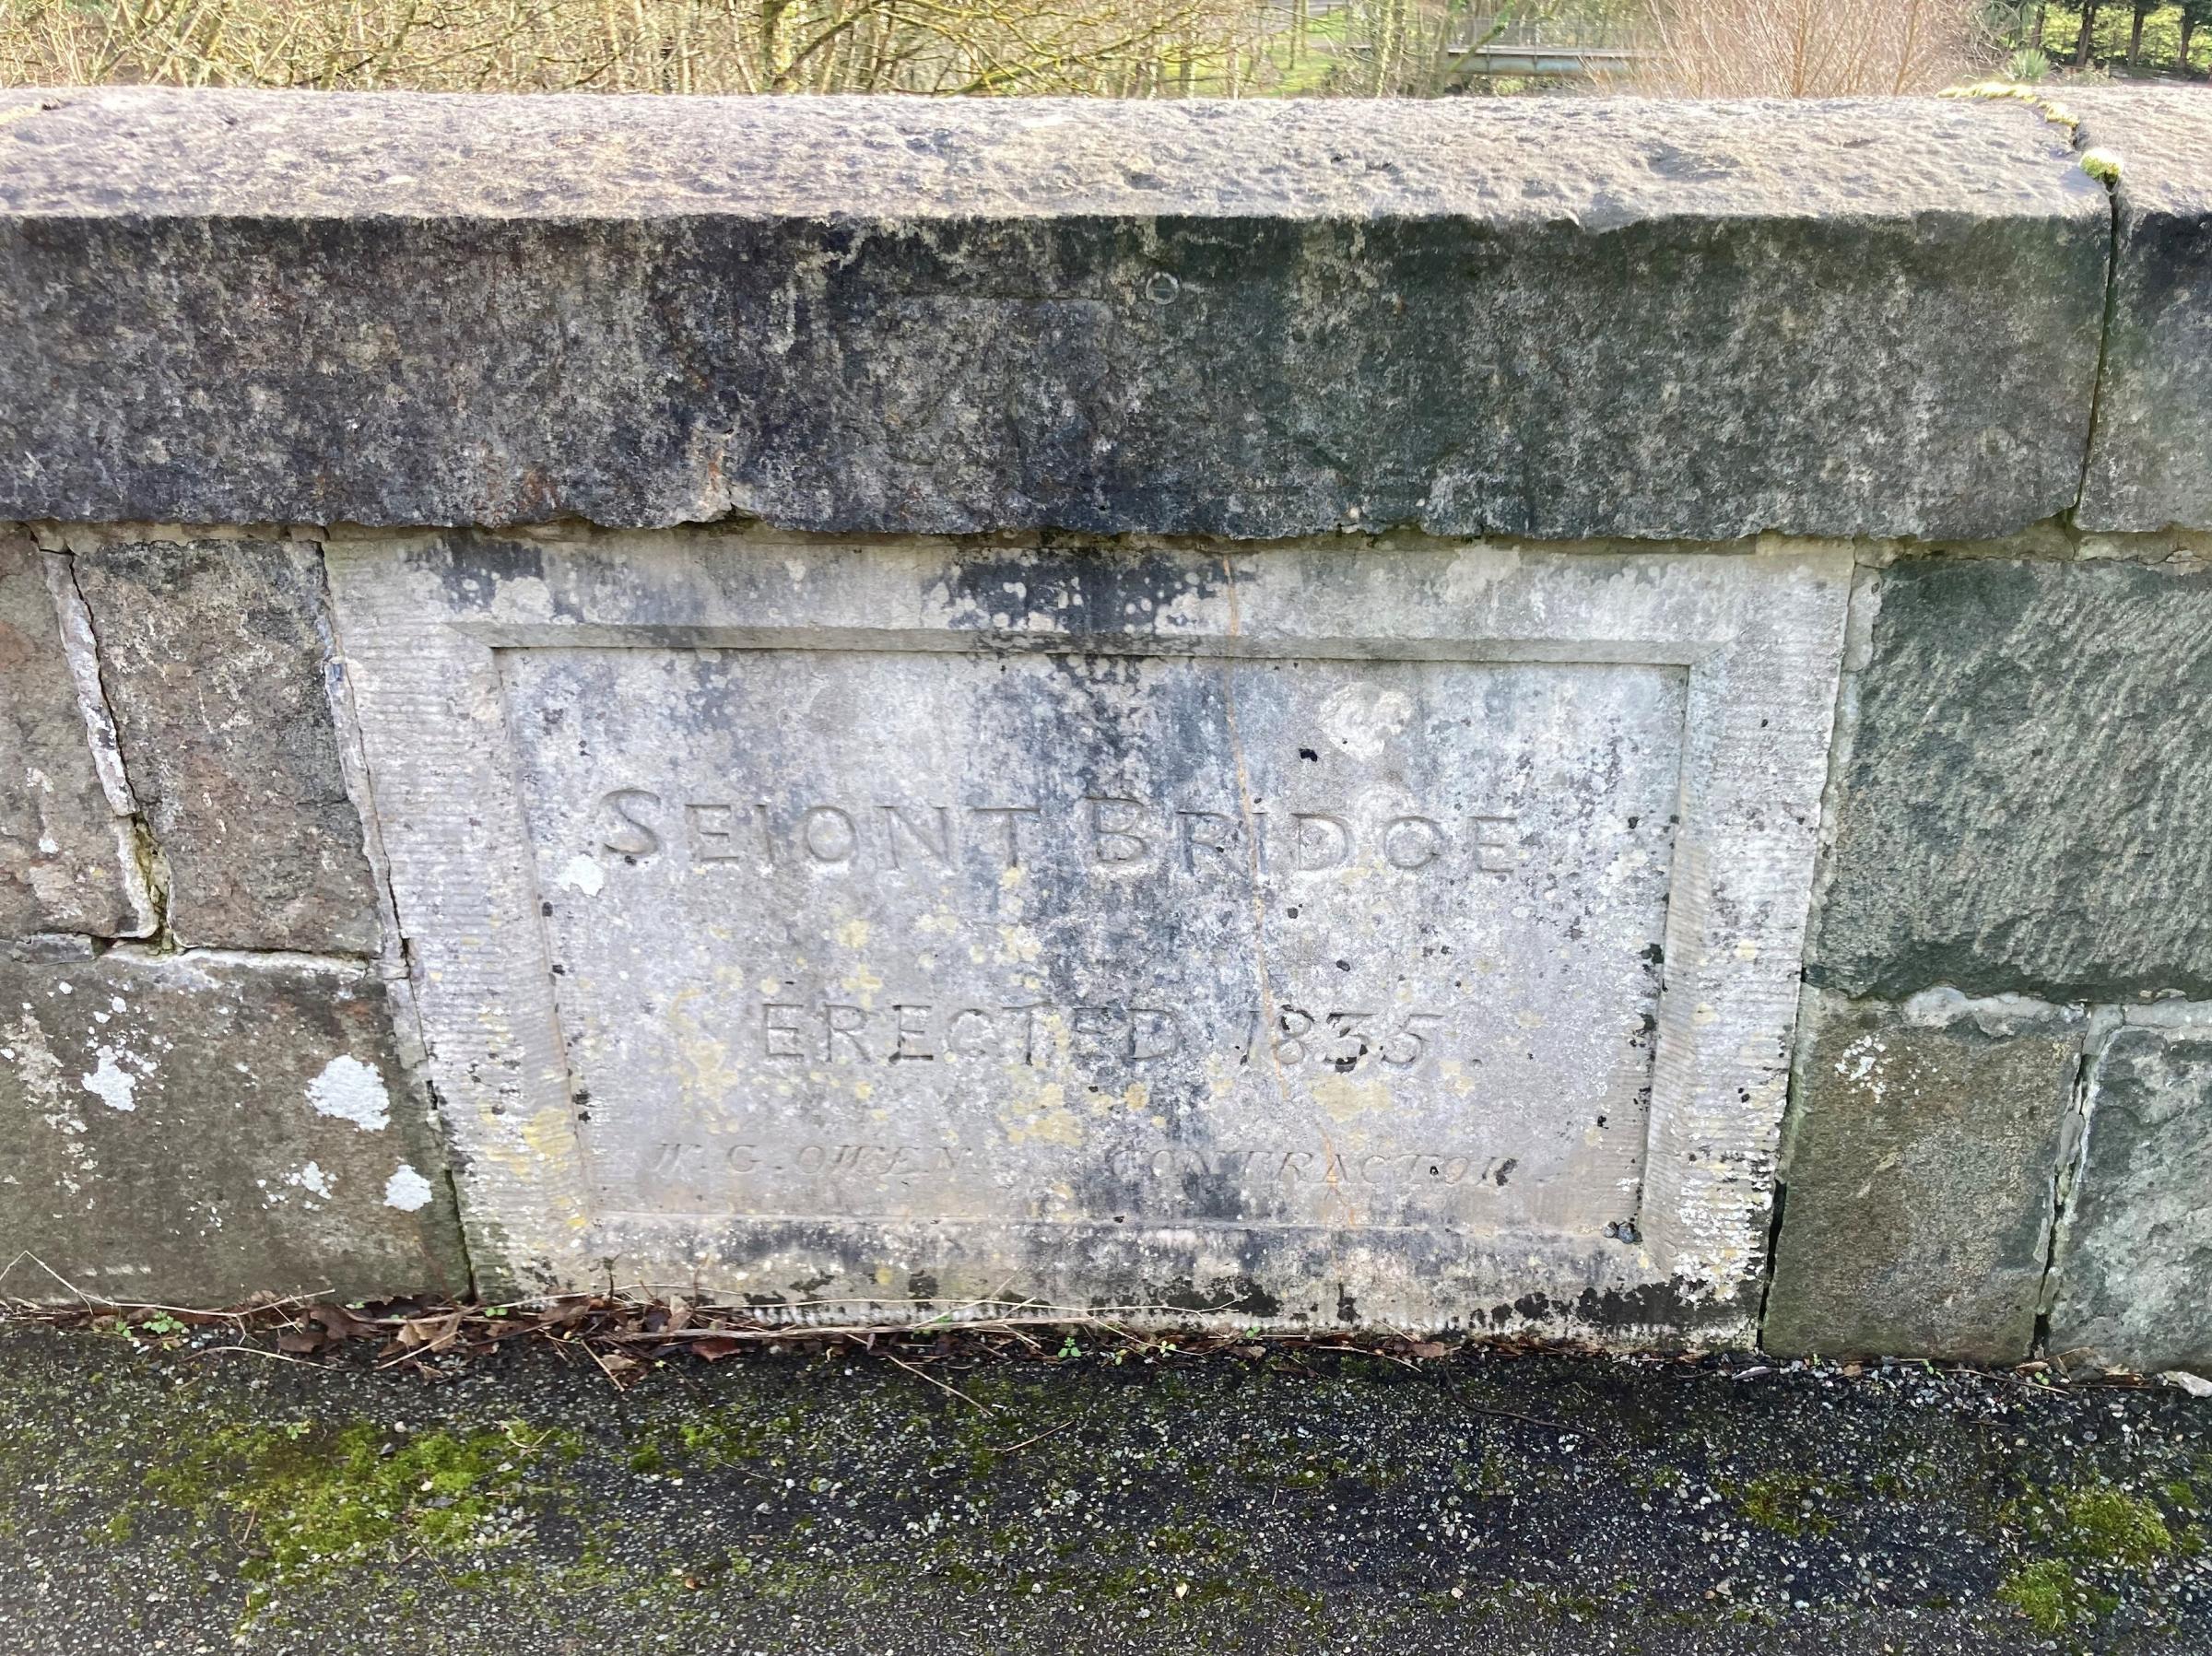 The disused Seiont Bridge built in 1835 - the stone plaque remembers WG Owen